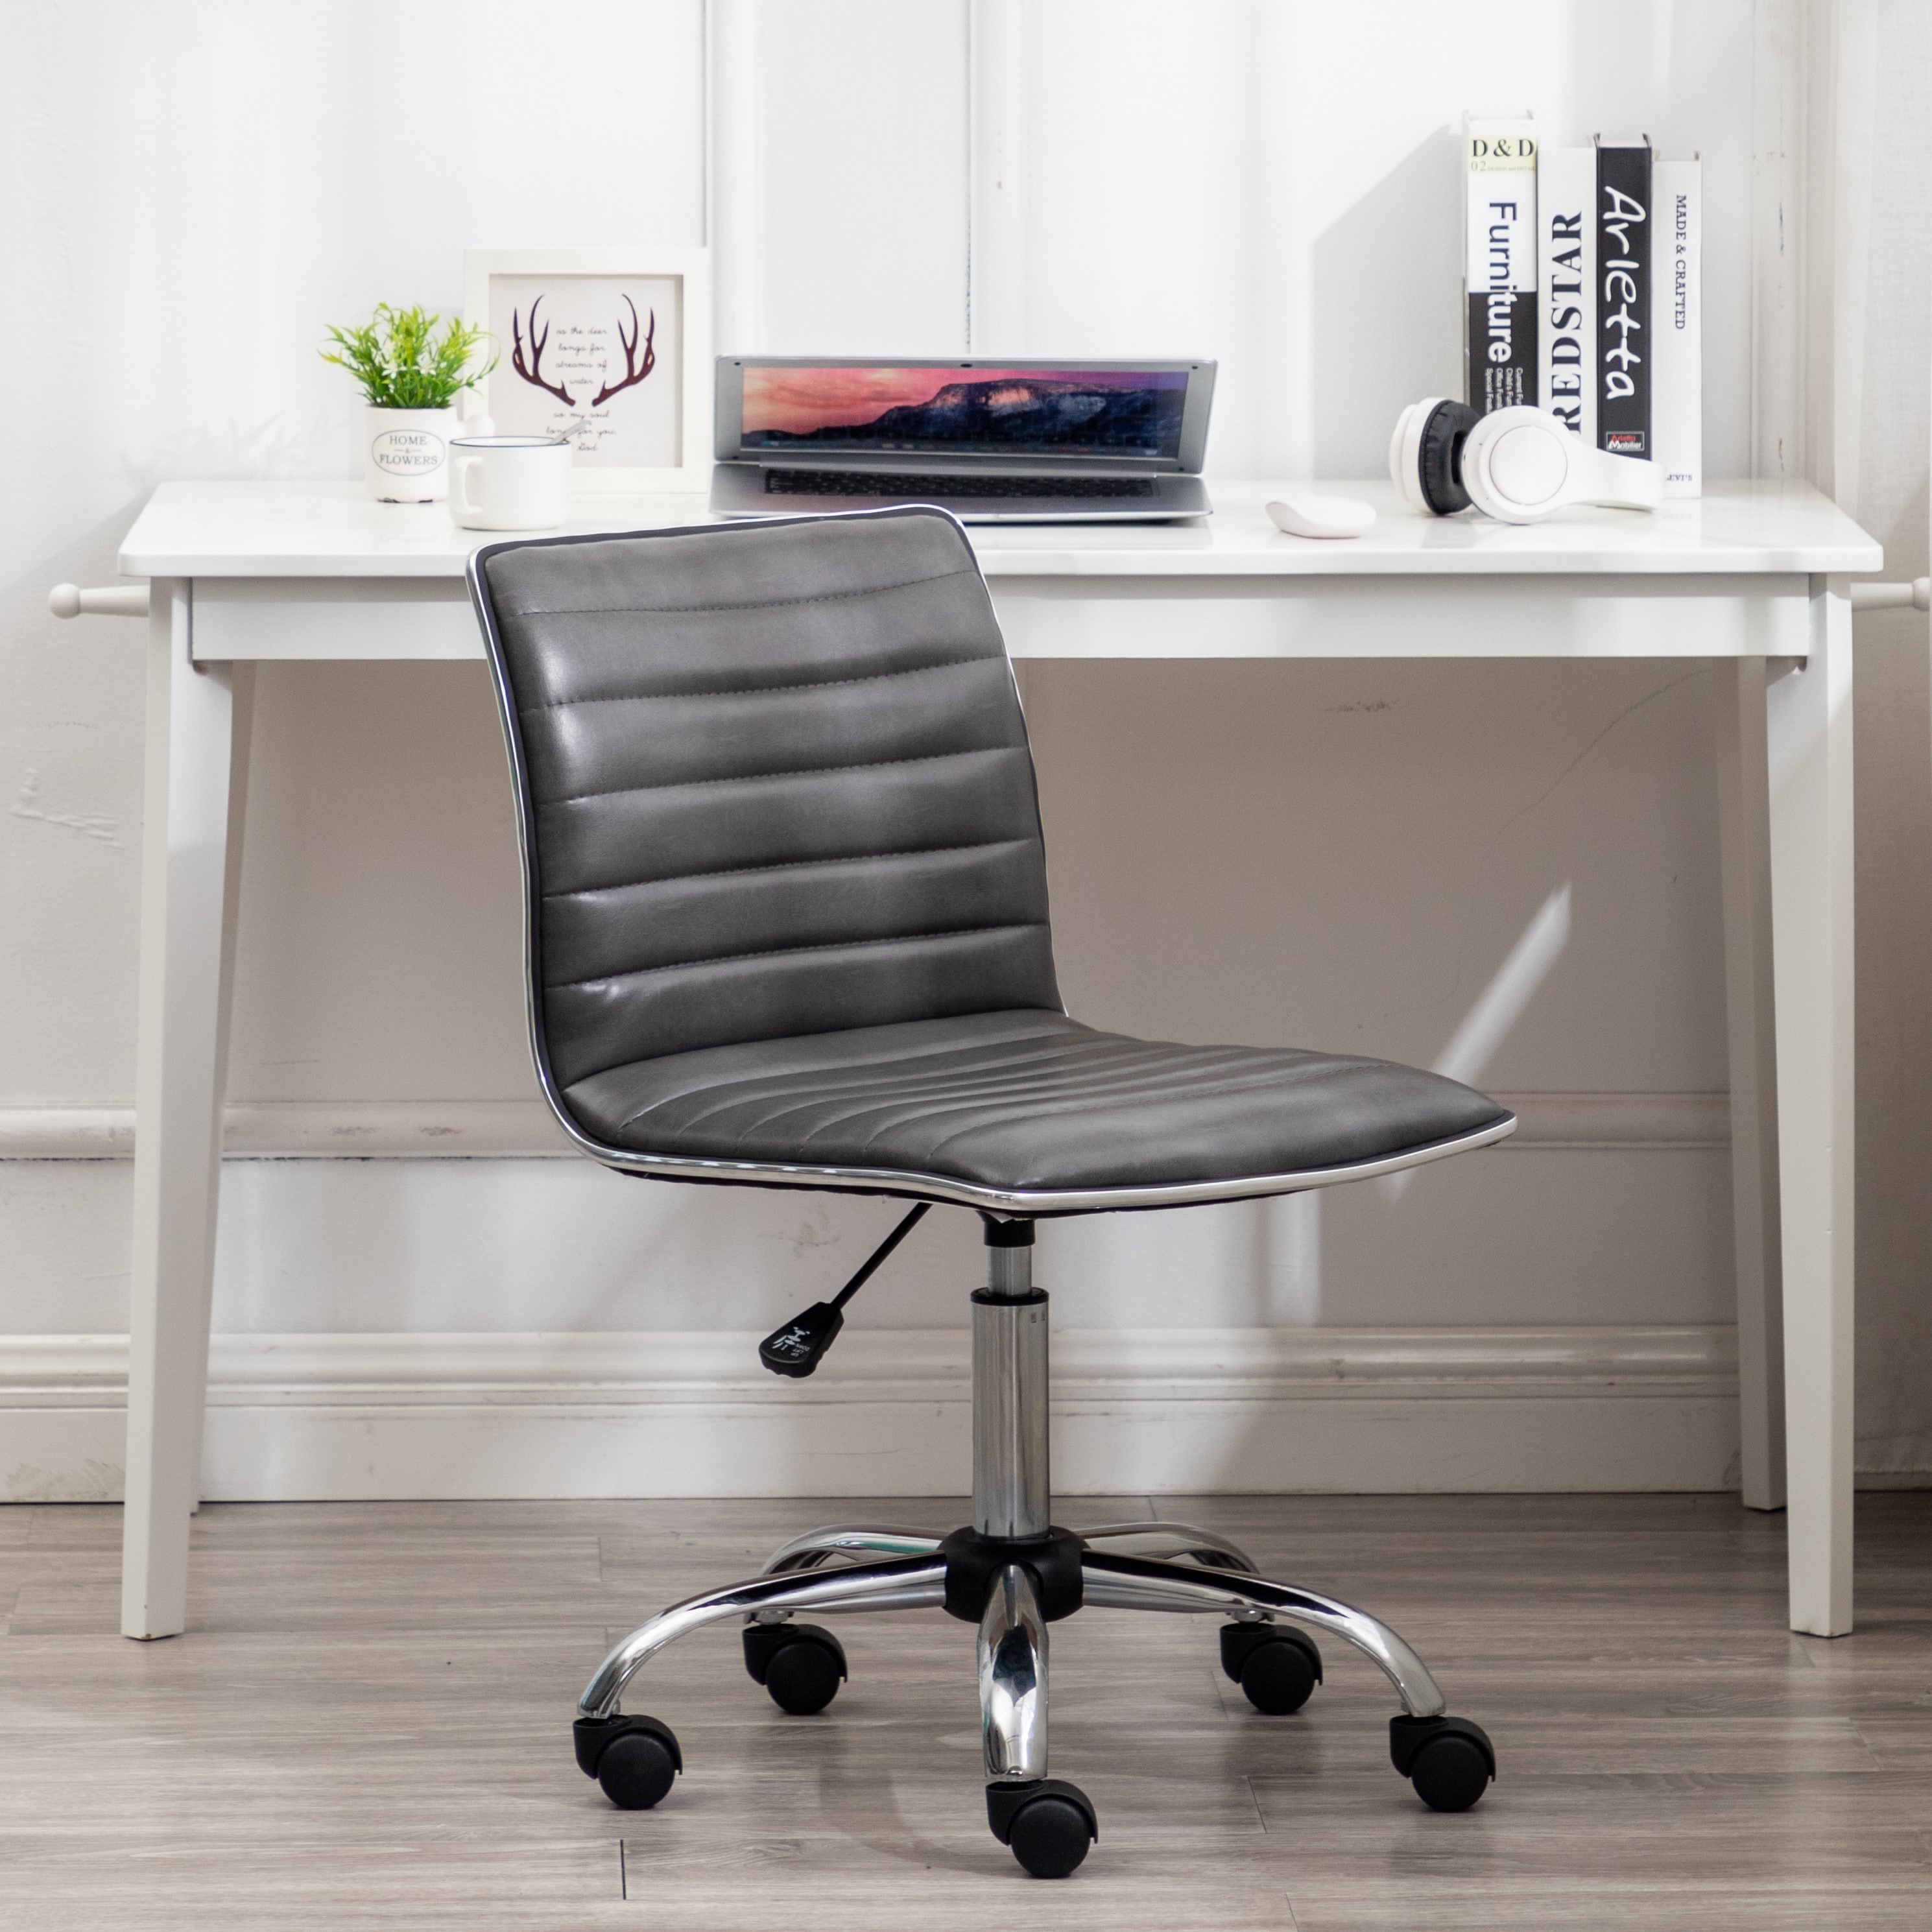 https://ak1.ostkcdn.com/images/products/is/images/direct/cf0af5ff25d31155cd8a19f7f541cfc0f0ddee42/Swivel-Mid-Back-Armless-Ribbed-Designer-Task-Chair-Faux-Leather-Soft-Upholstery-Office-Chair-Gray.jpg